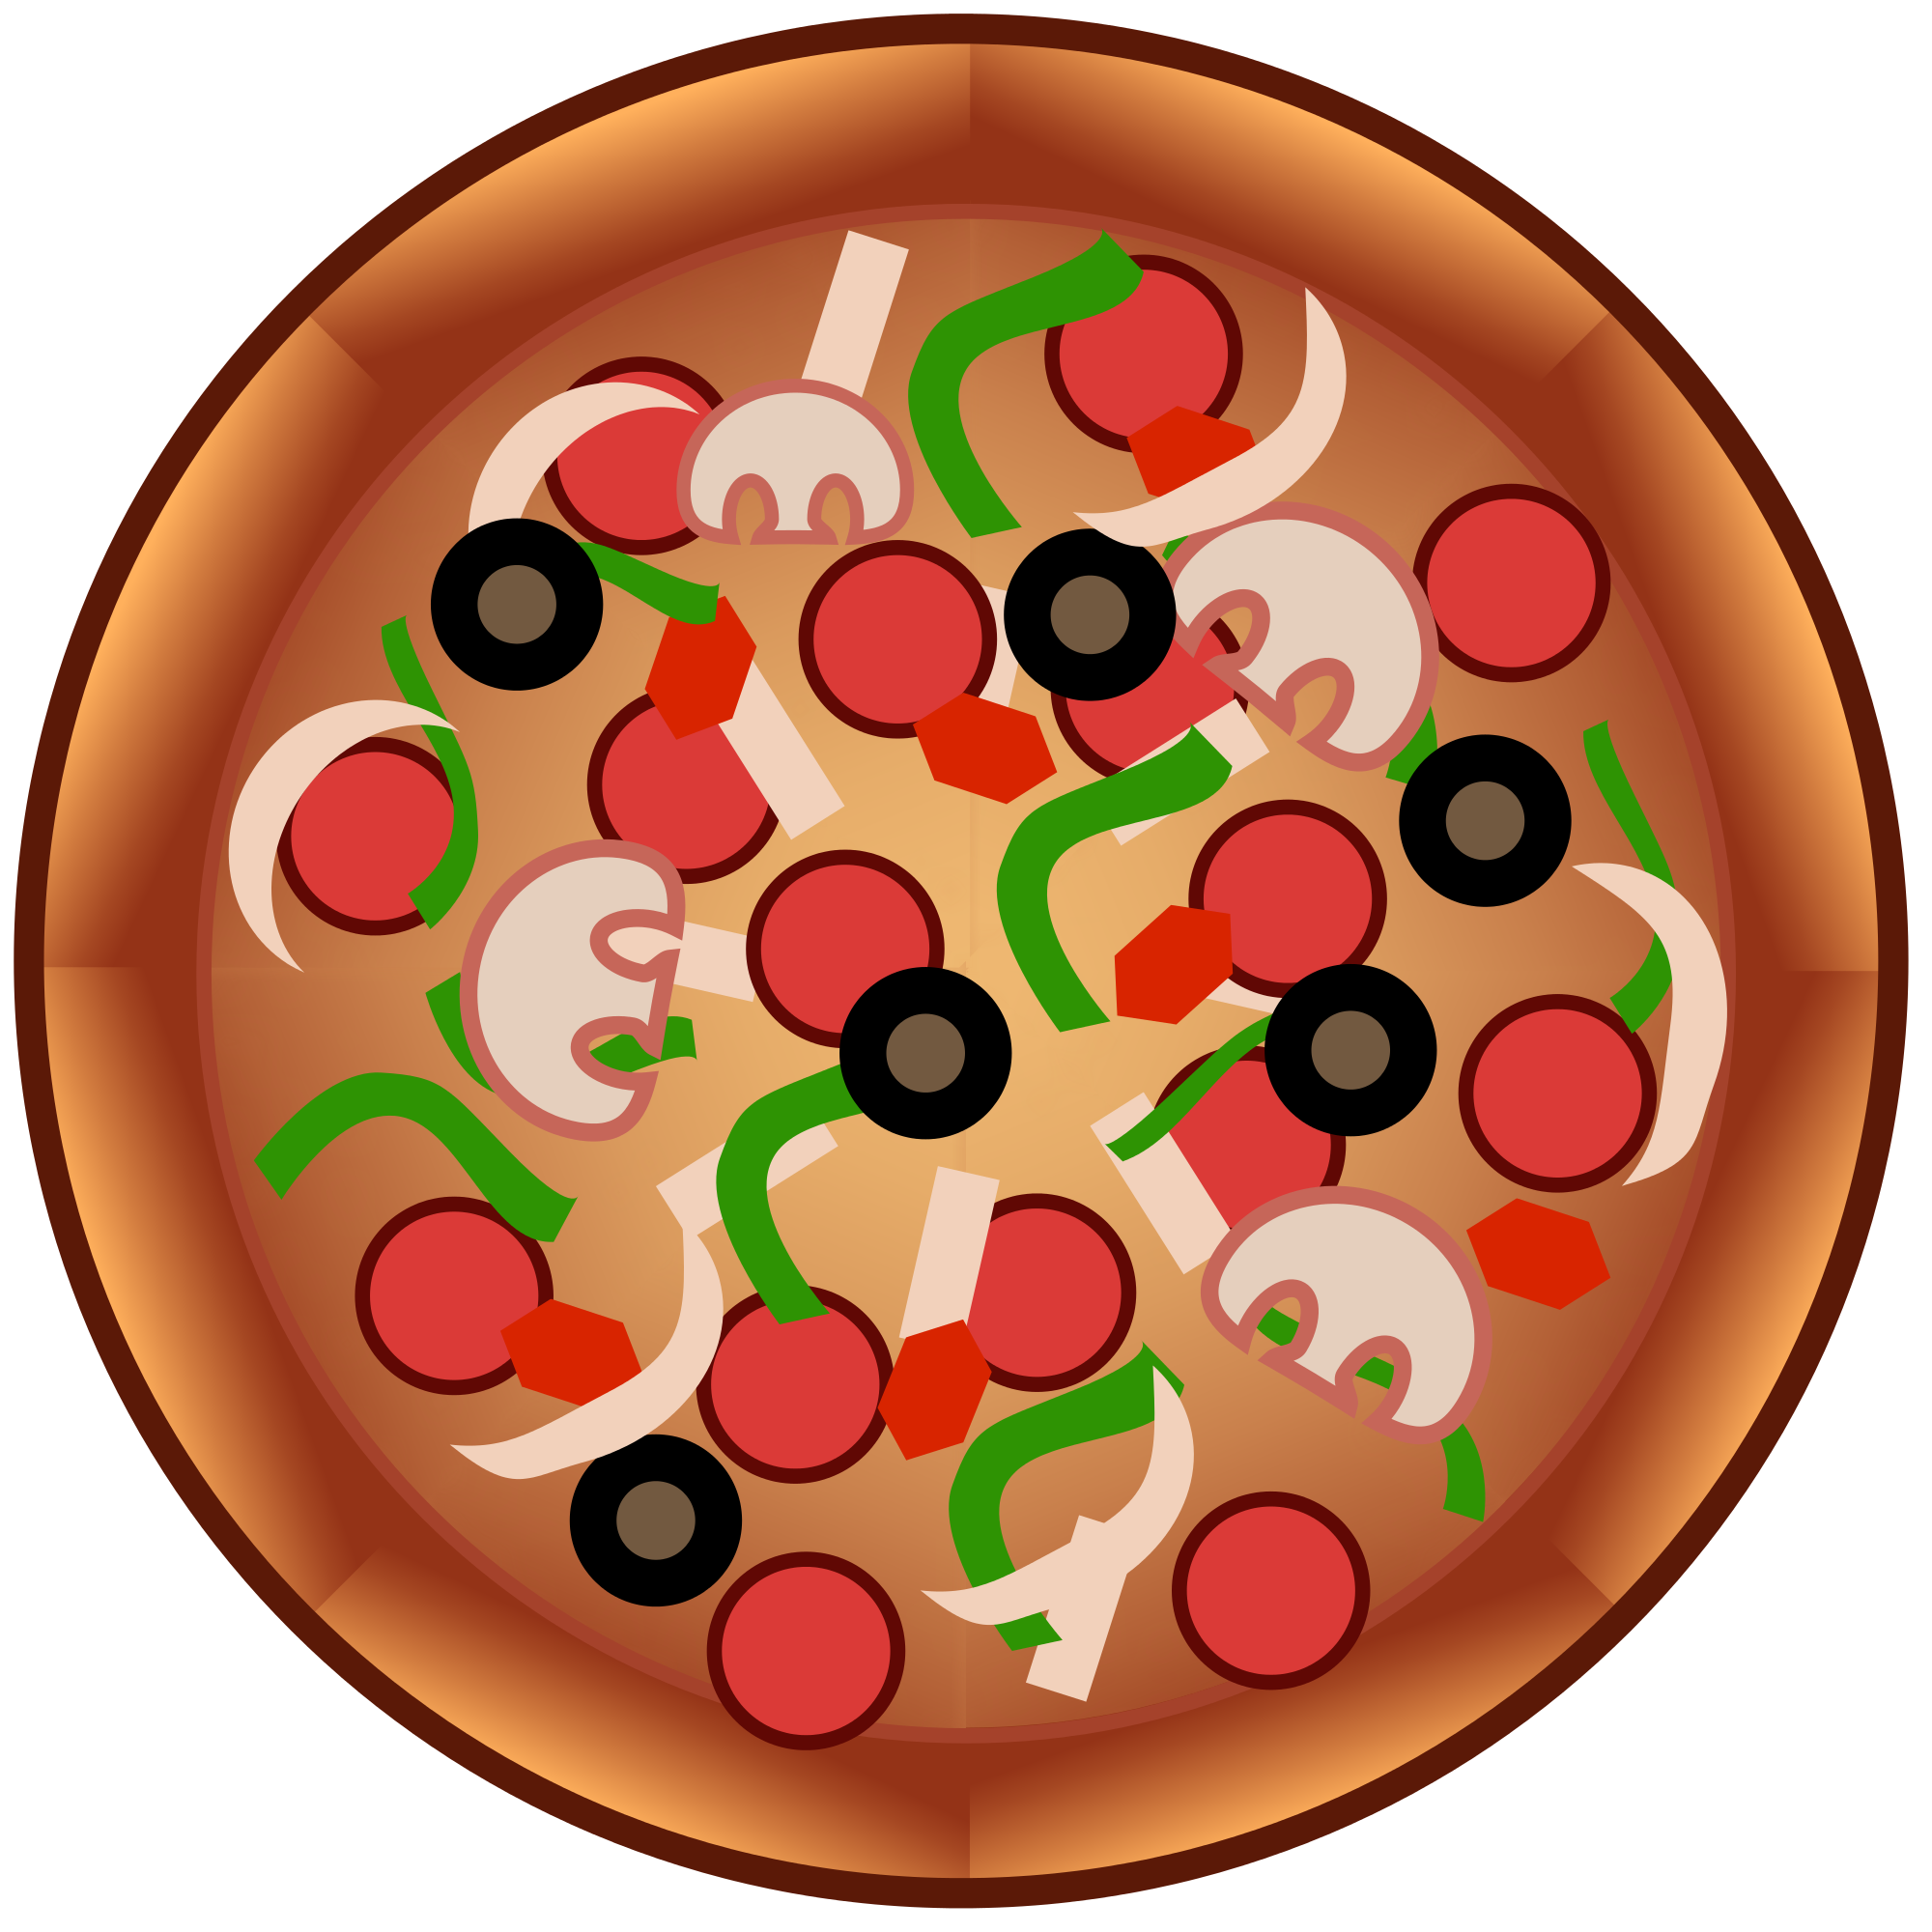 Create Your Own Pizza!